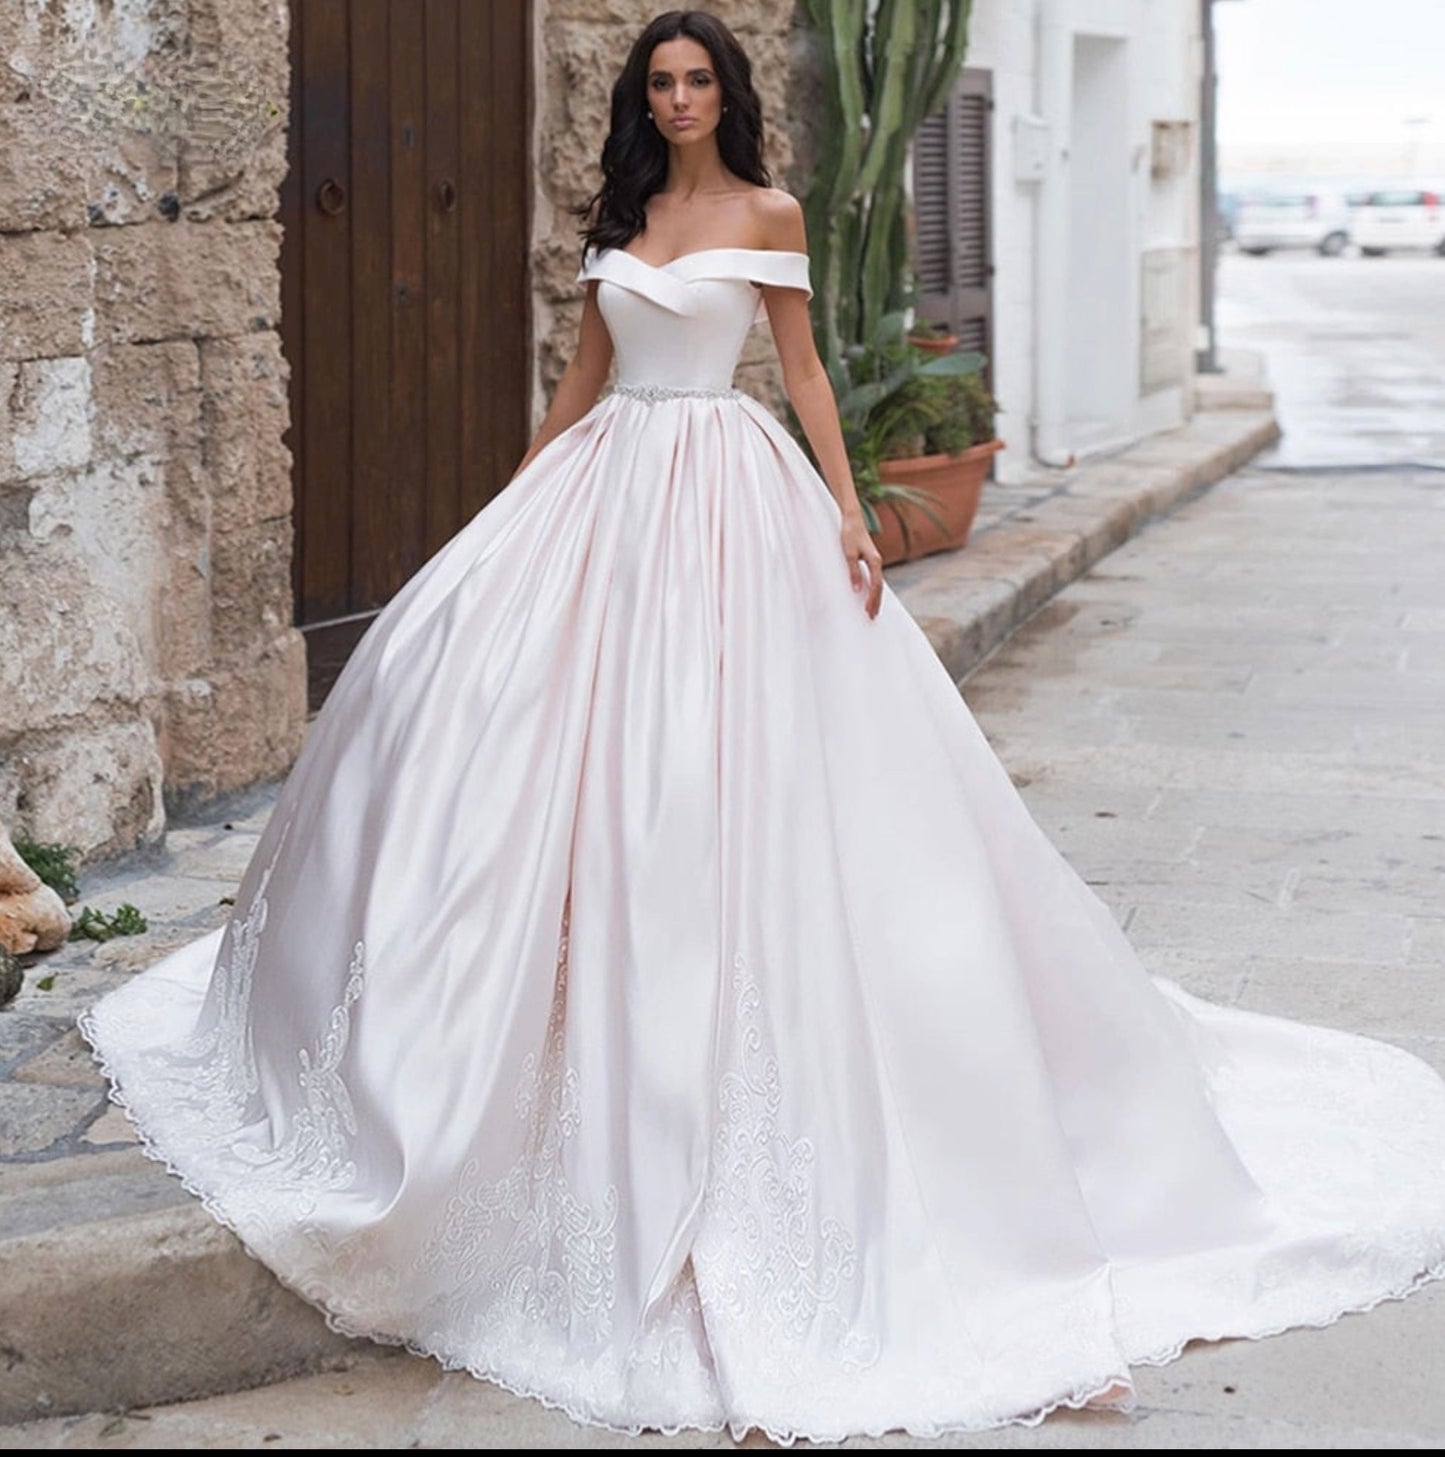 Mermaid Satin Lace Wedding Dresses Bridal Gown With Side Slit – Pgmdress